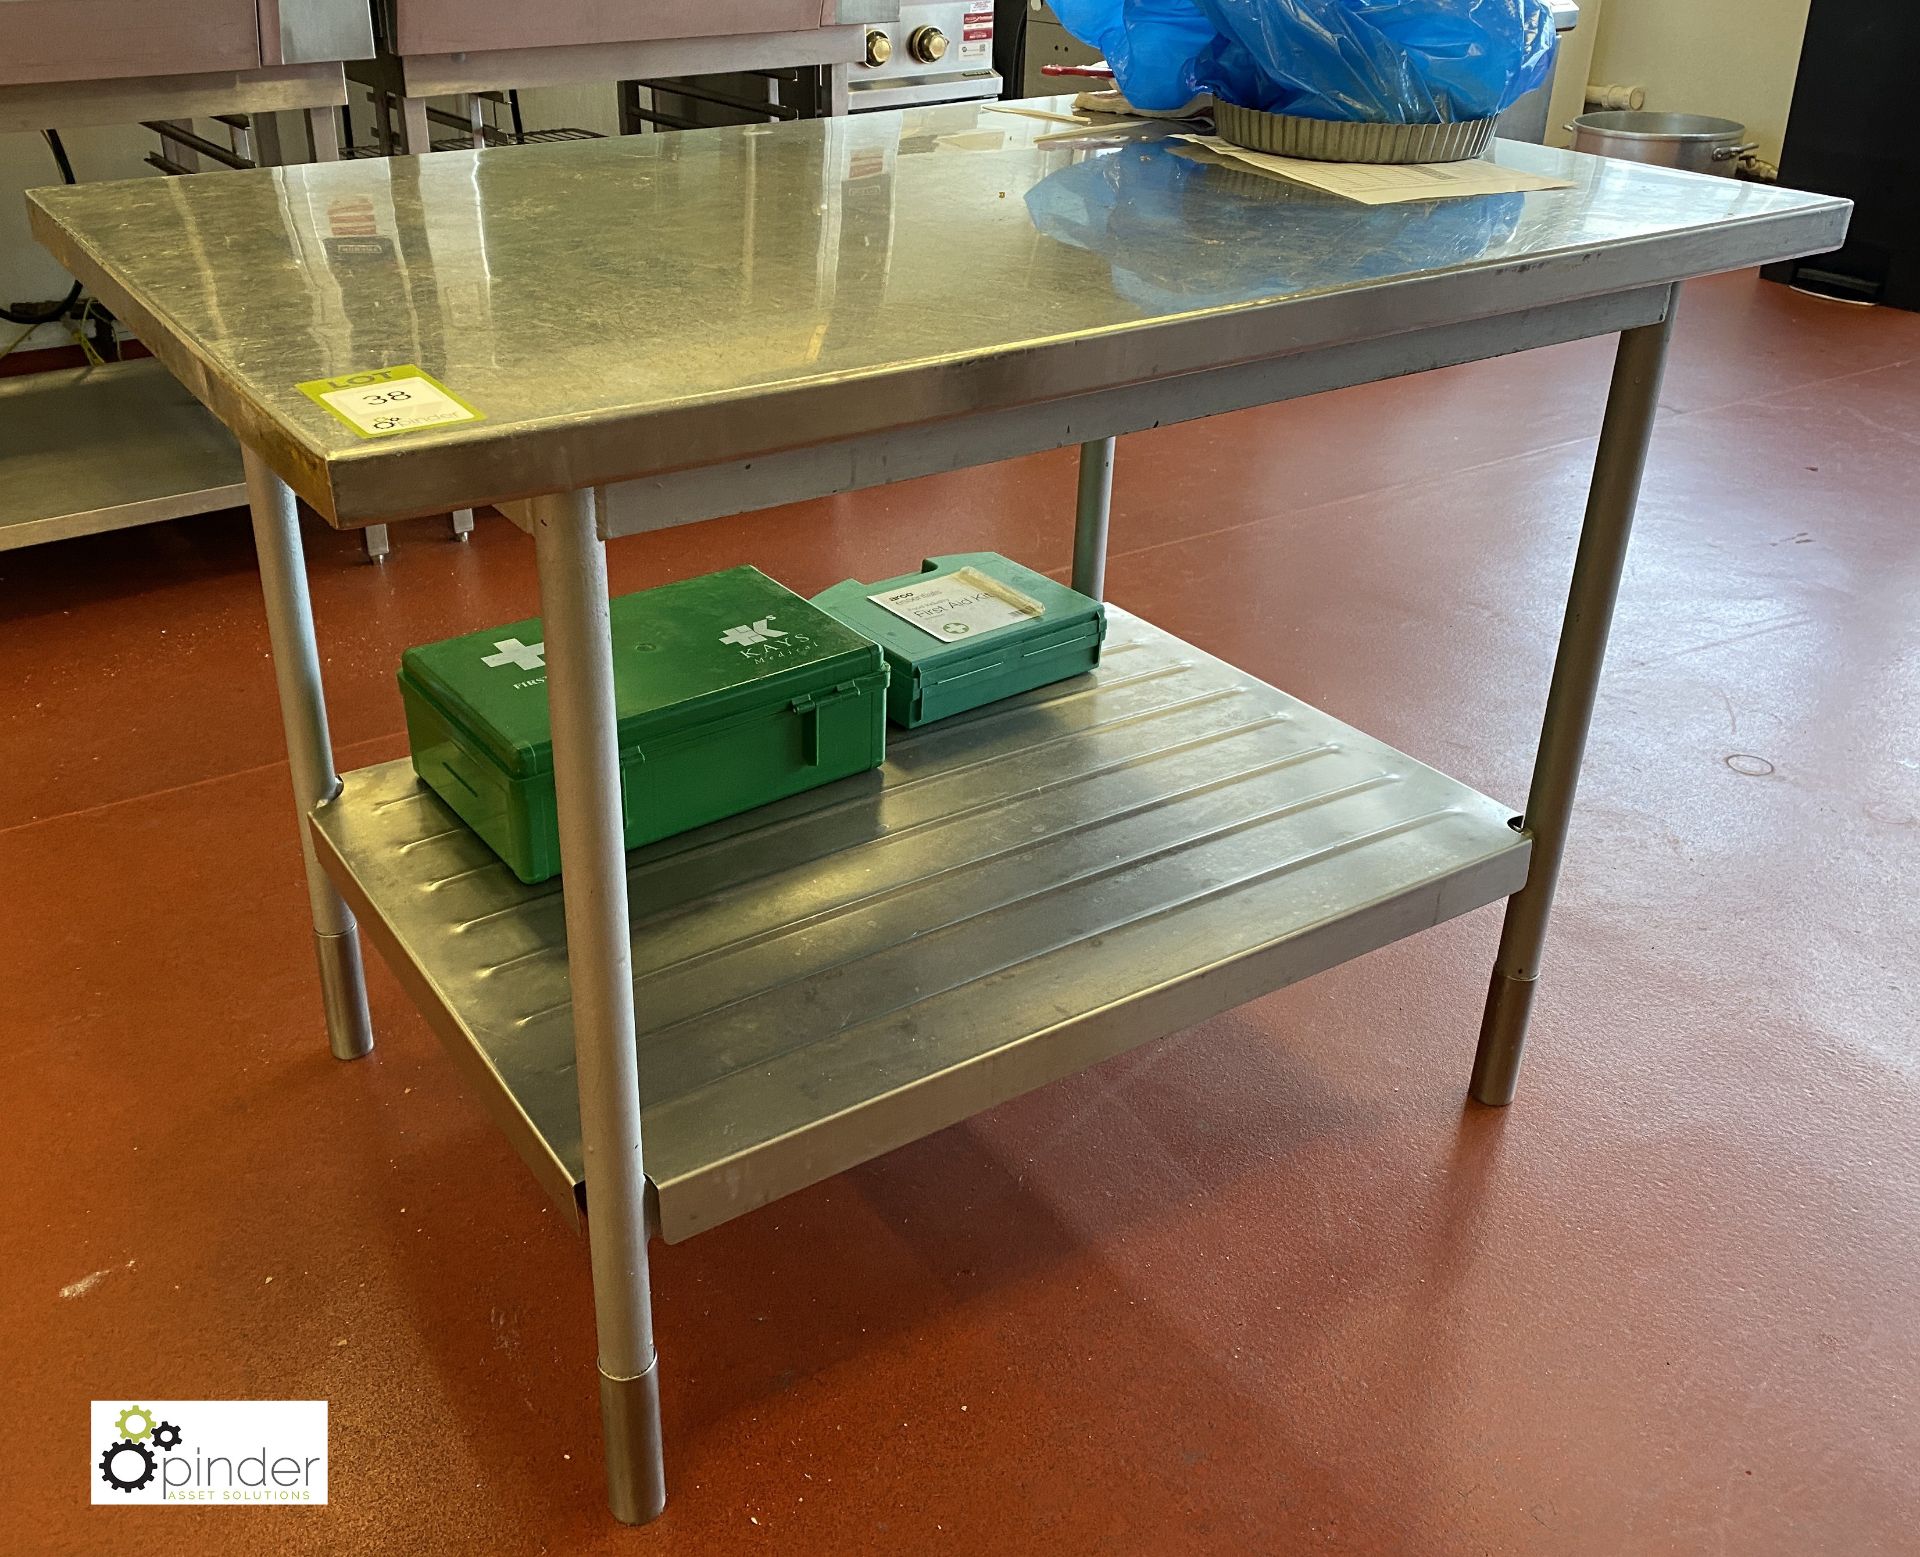 Stainless steel Preparation Table, 1230mm x 775mm x 870mm, with undershelf (lot location –